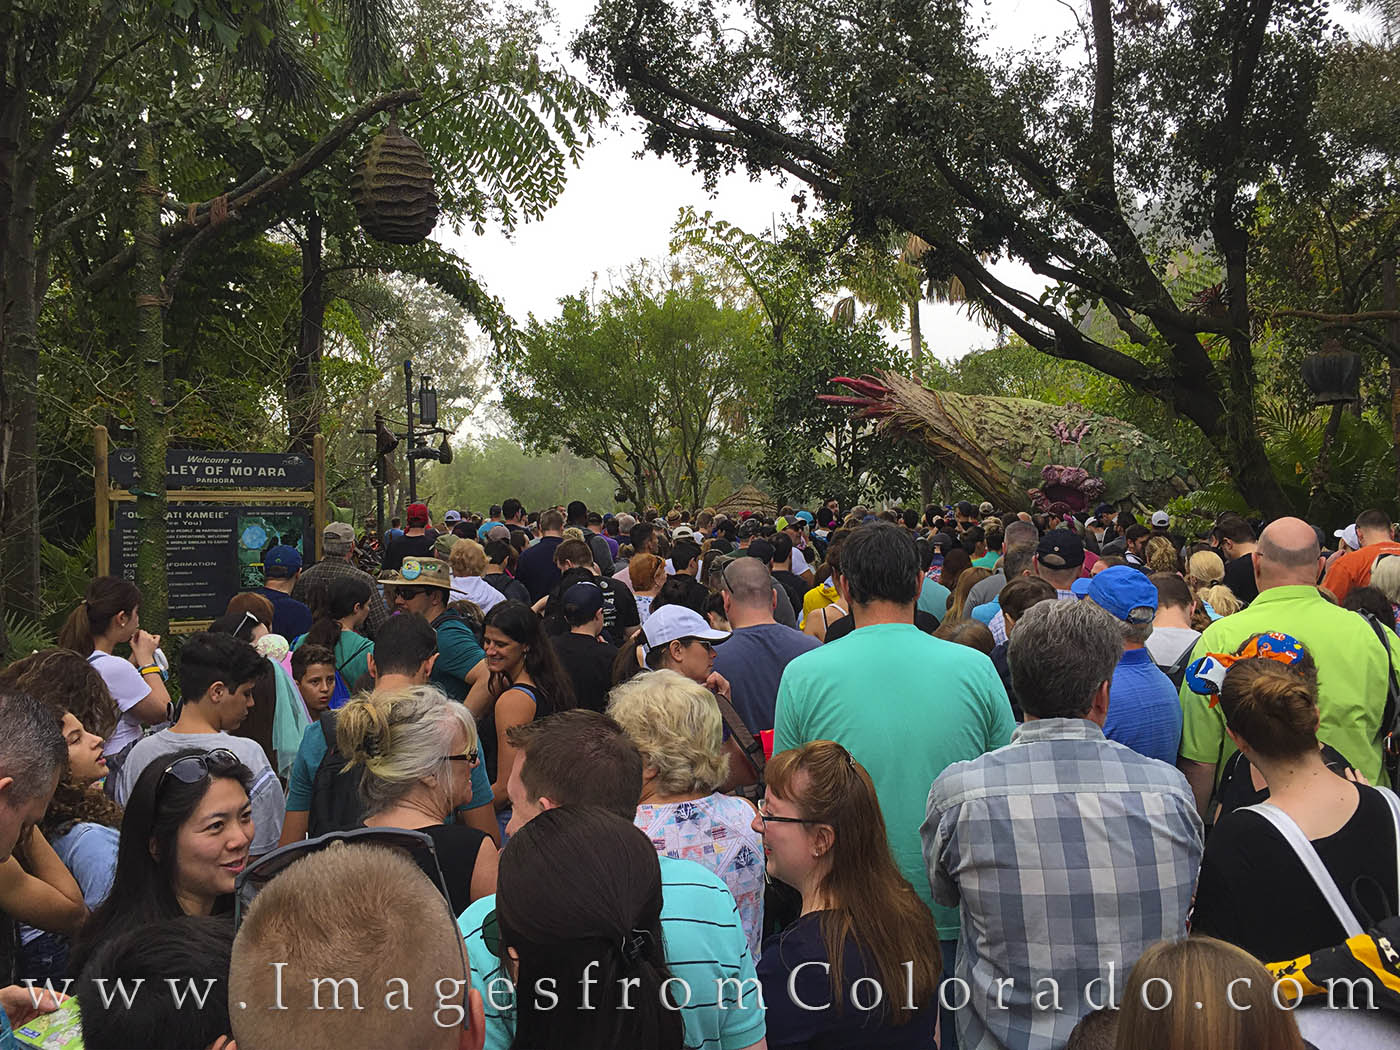 The crowds to see Pandora thick&nbsp;and ride the Flight of Passage, Disney's new Avatar ride, were several hours long. Luckily...